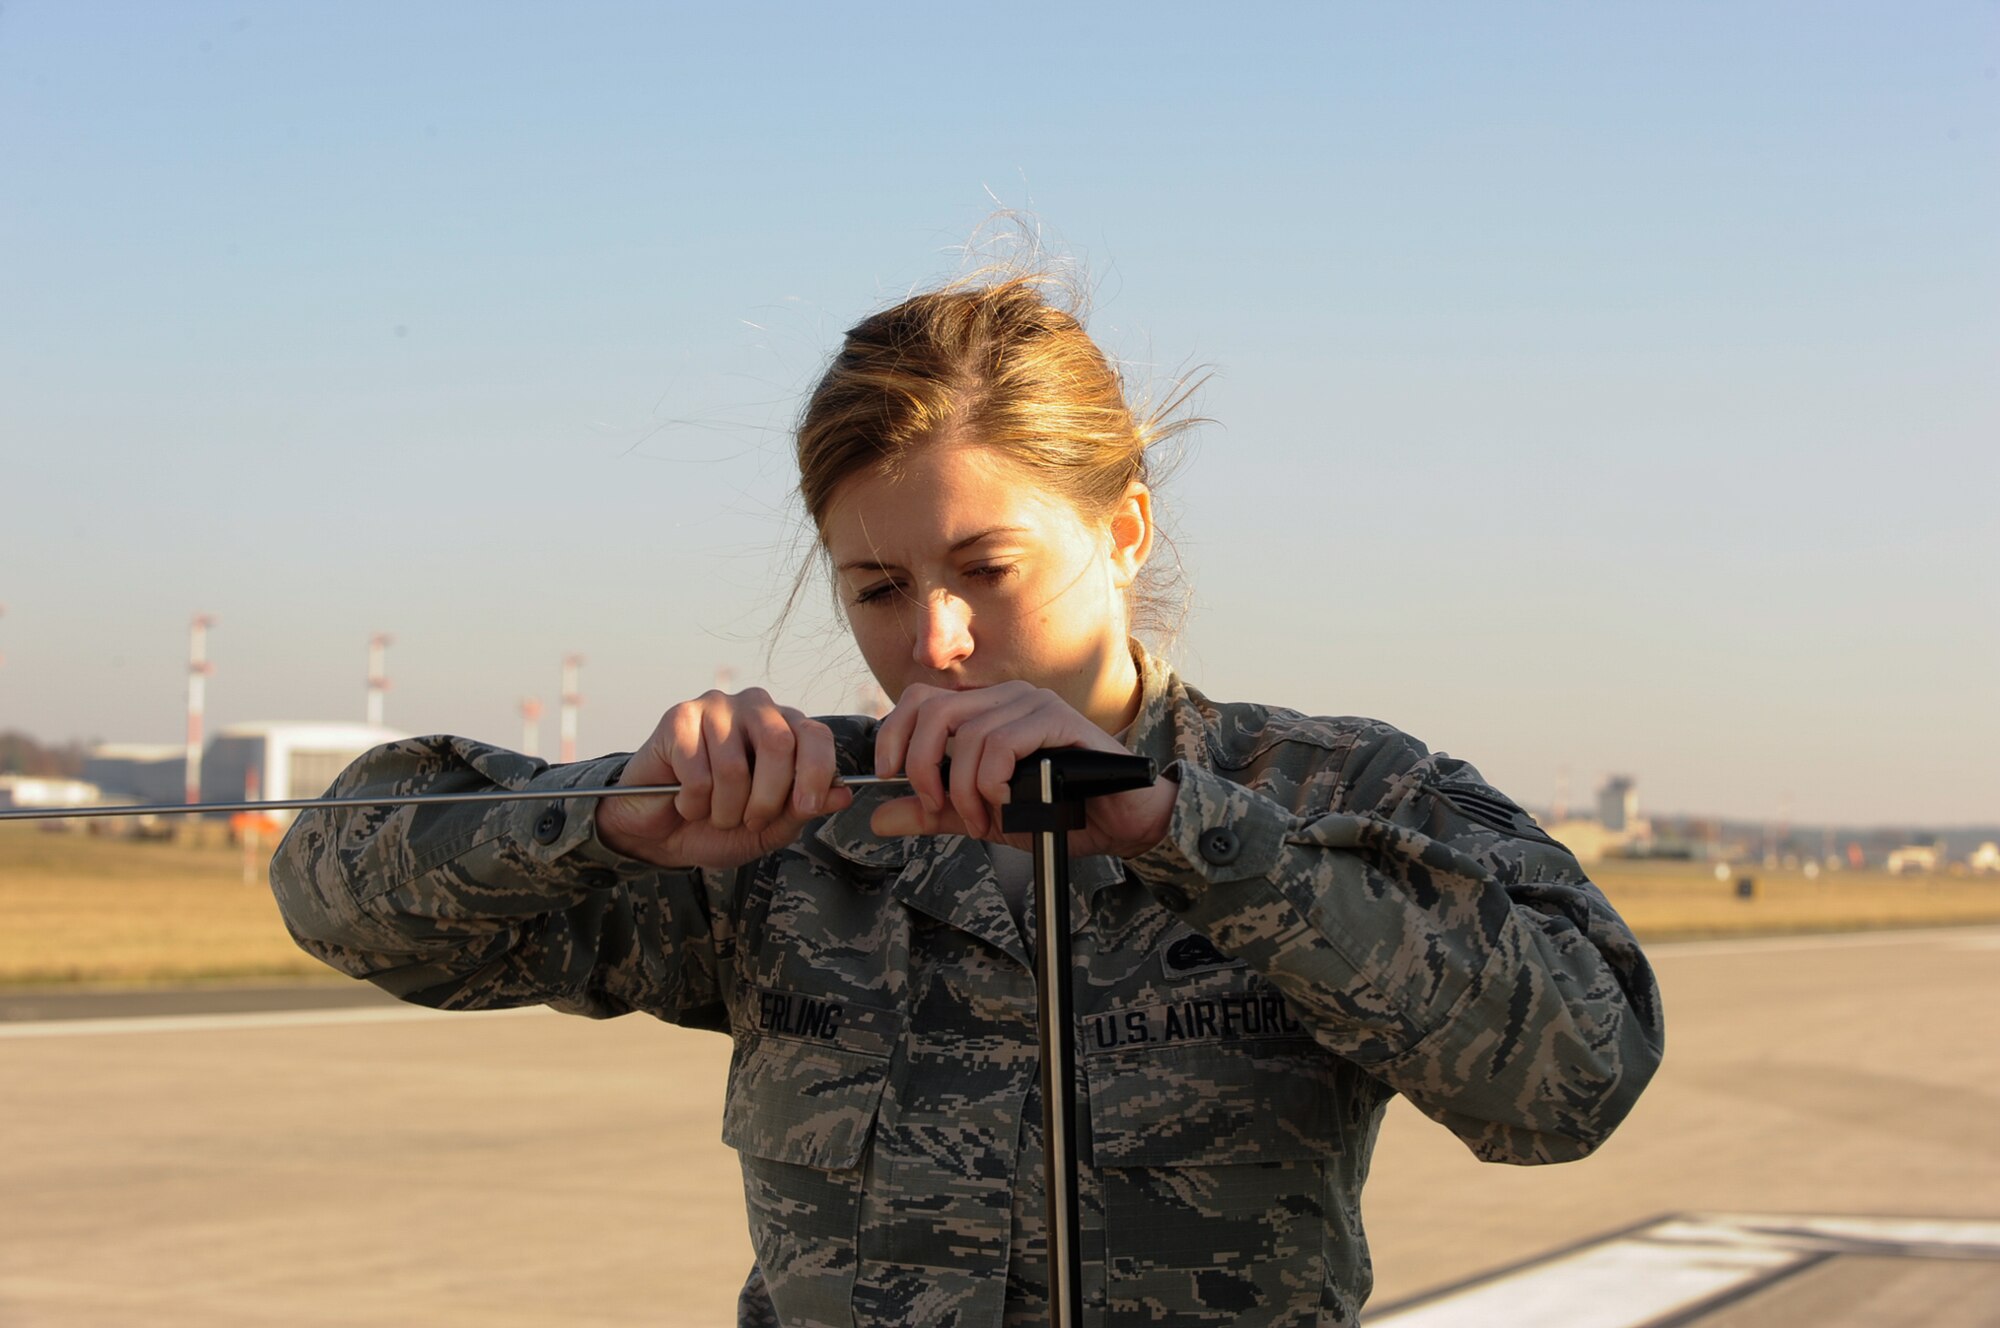 Senior Airman Nikki Erling, 86th Operations Support Squadron airfield systems technician, puts together an antenna at Ramstein Air Base, Germany, Nov. 14, 2016. The antenna is part of a specially built test vehicle the Air Traffic Control and Landing Systems flight uses to drive the length of the runway eight times with a larger antenna attached to the vehicle 12 meters in height to simulate an aircraft and ensure the signals are being brought directly down the centerline. This system is a zero visibility-auto land system that requires additional checks to verify the system is performing as required. (U.S. Air Force photo by Airman 1st Class Savannah L. Waters)